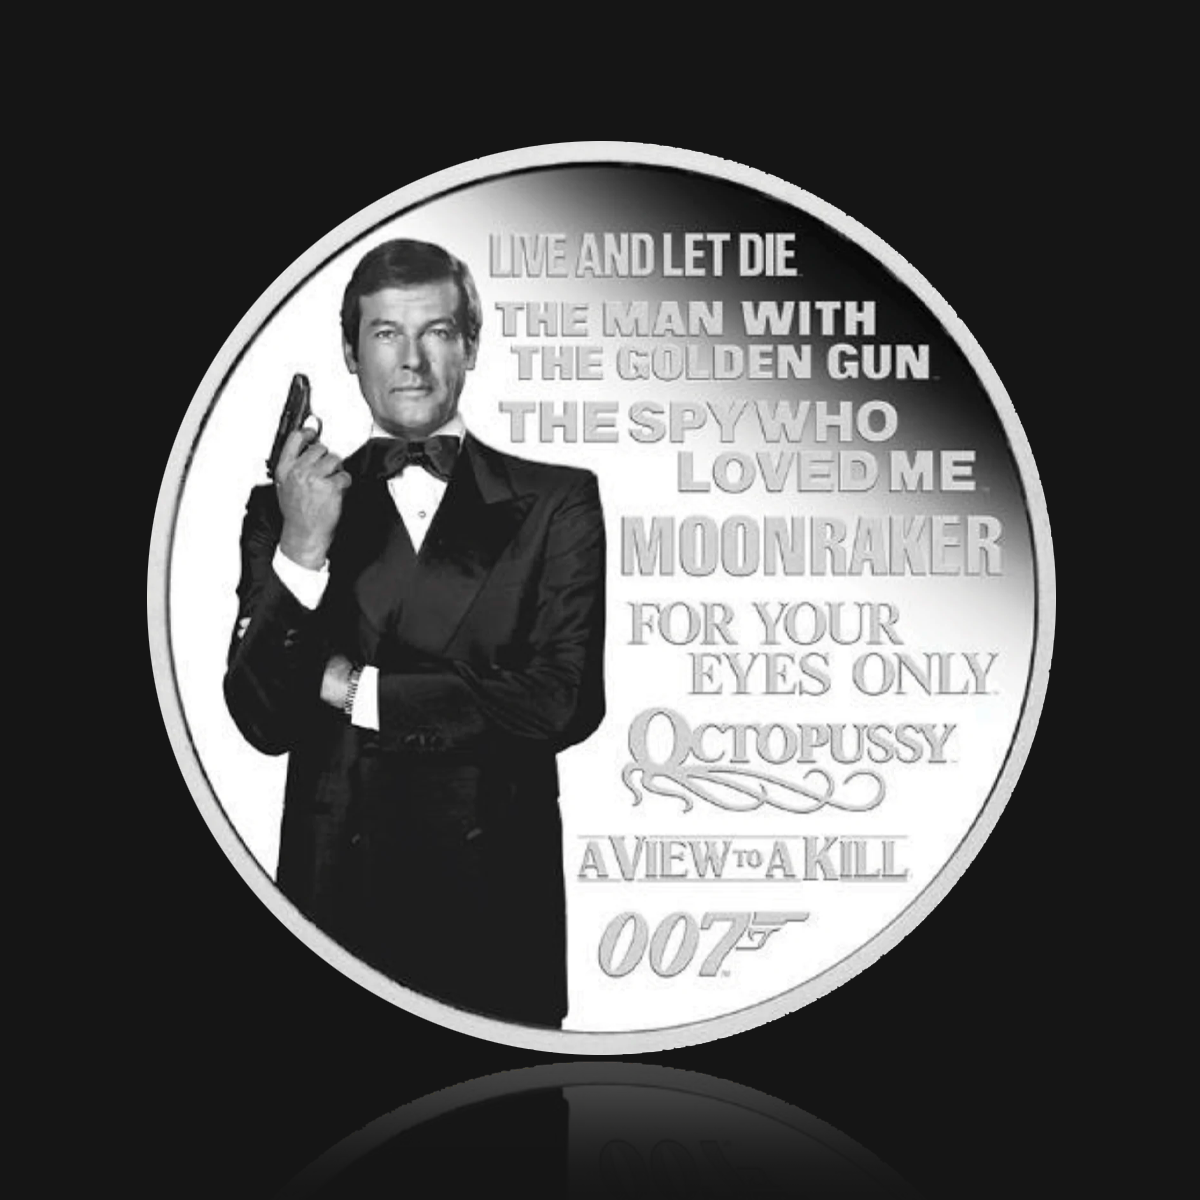 James Bond Roger Moore 1oz Silver Proof Coin - Numbered Edition - By The Perth Mint